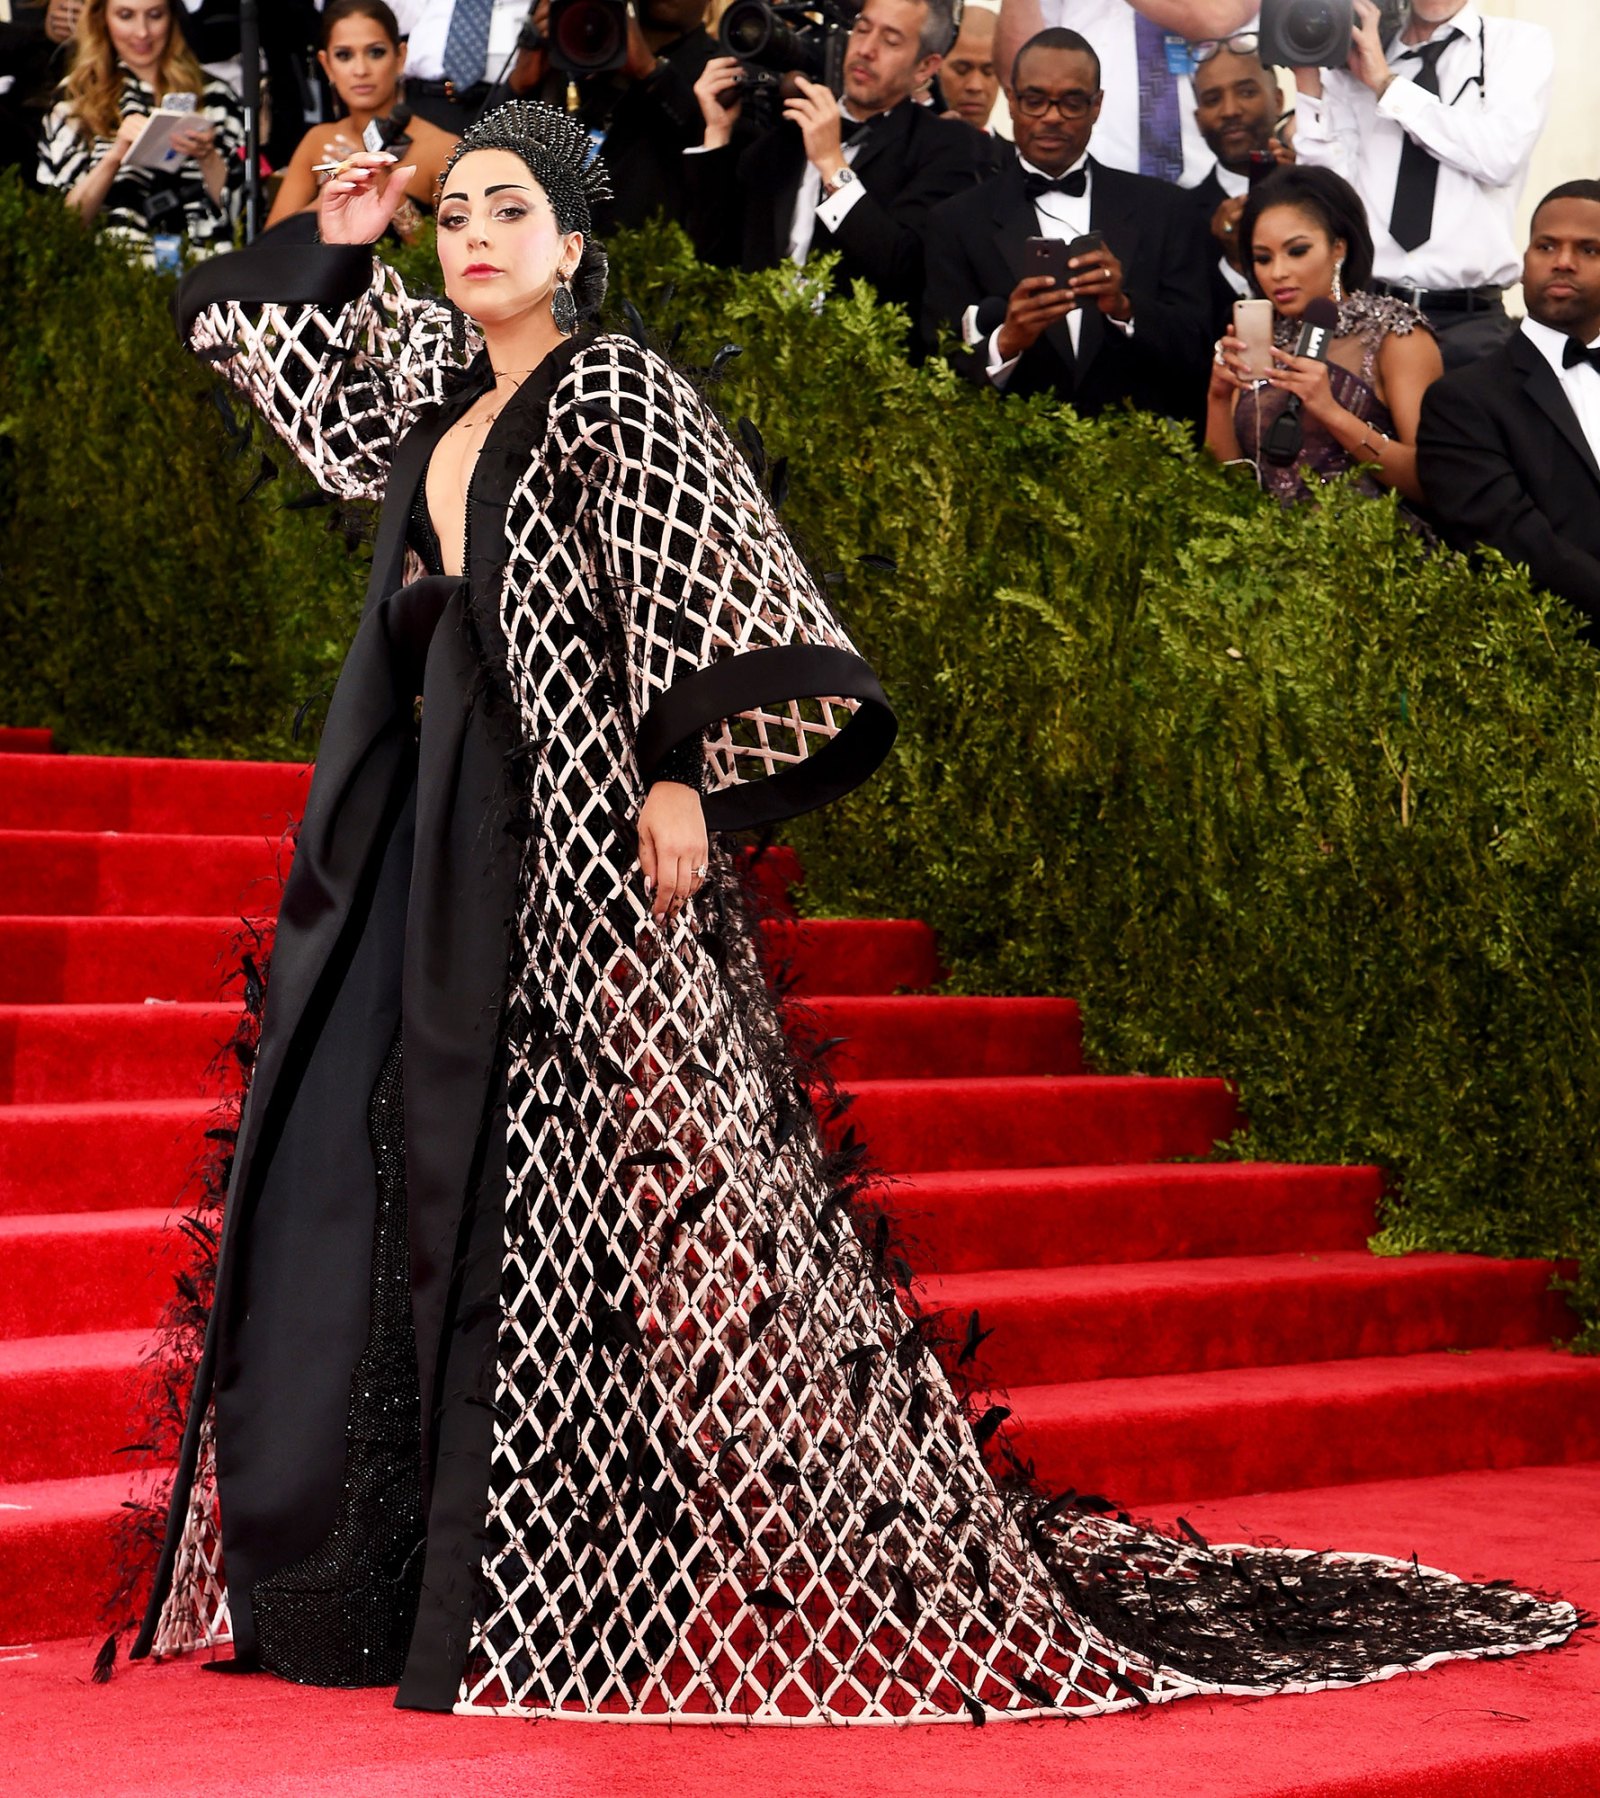 Lady Gaga The Wild Met Gala Red Carpet Fashion Looks We Can't Stop Thinking About